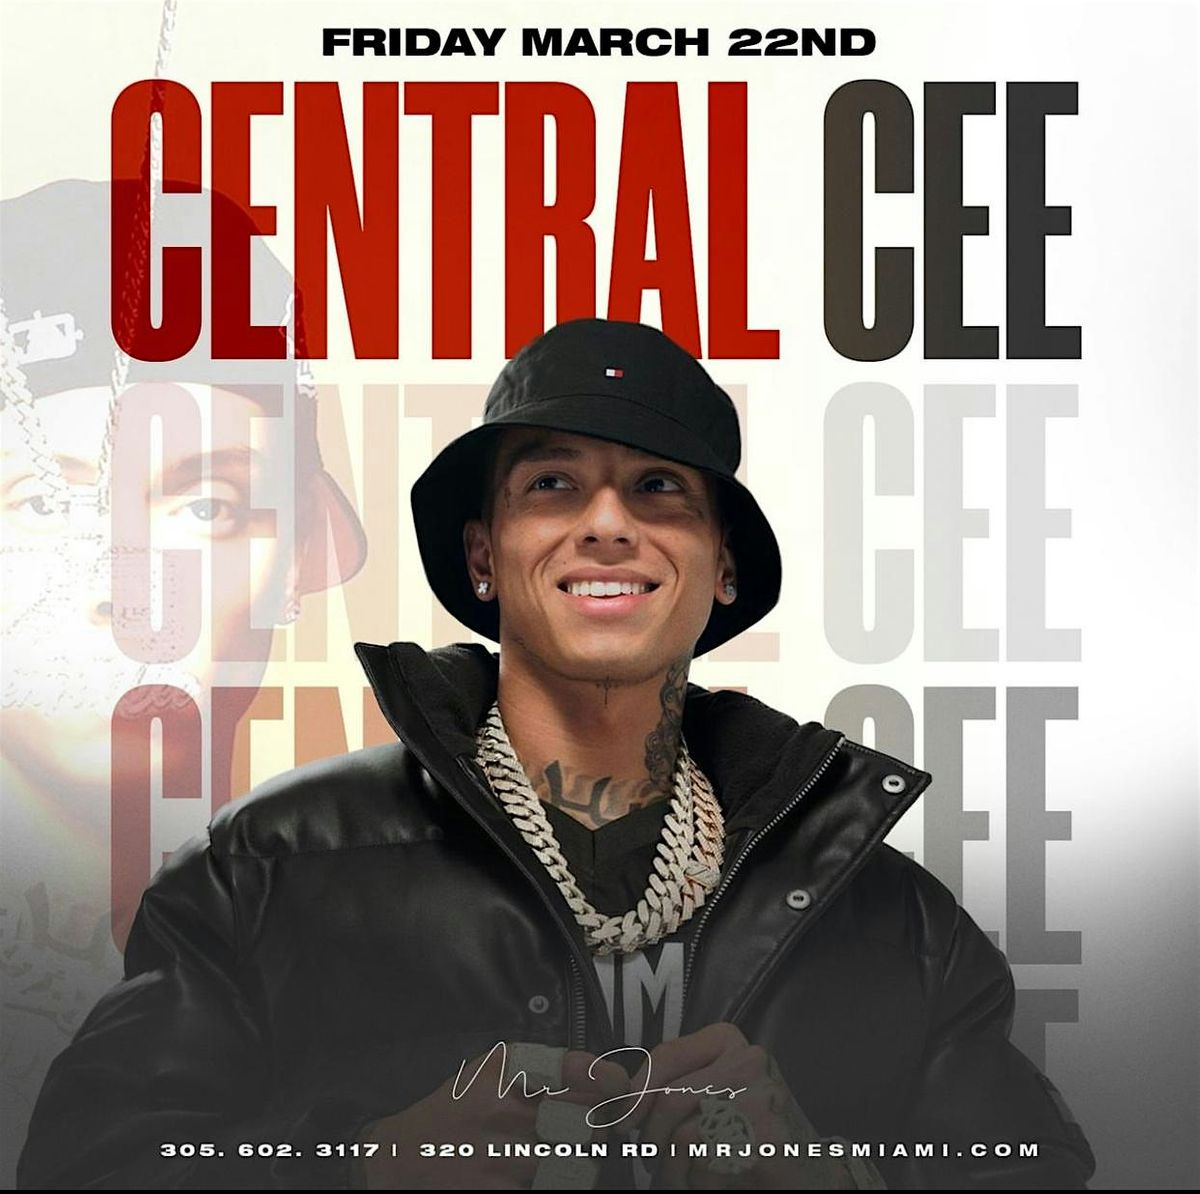 MR JONES Presents CENTRAL CEE Live {Friday;22nd March}2024!.